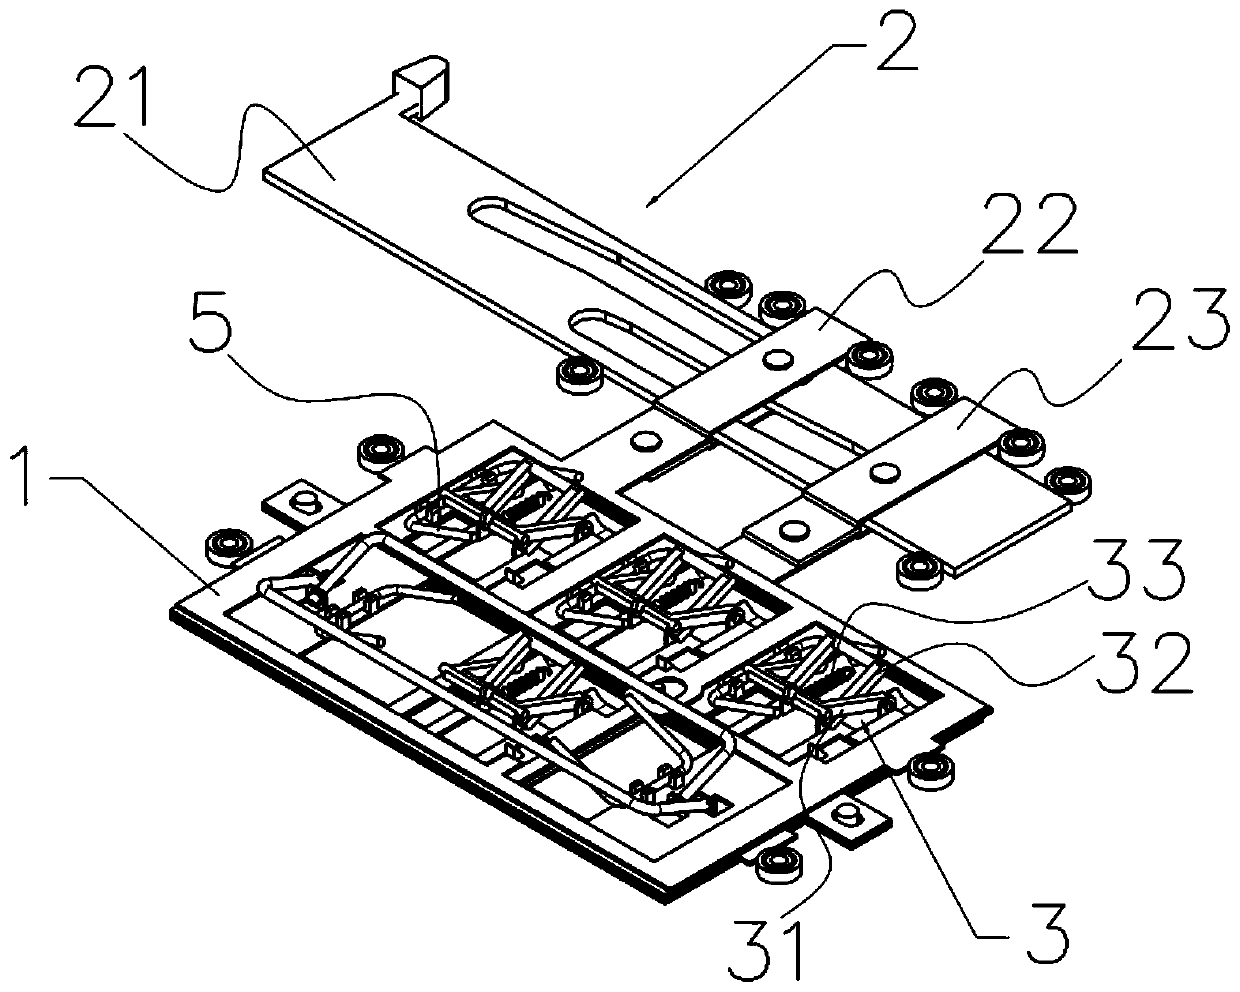 Liftable and foldable key and lifting key assembly with same